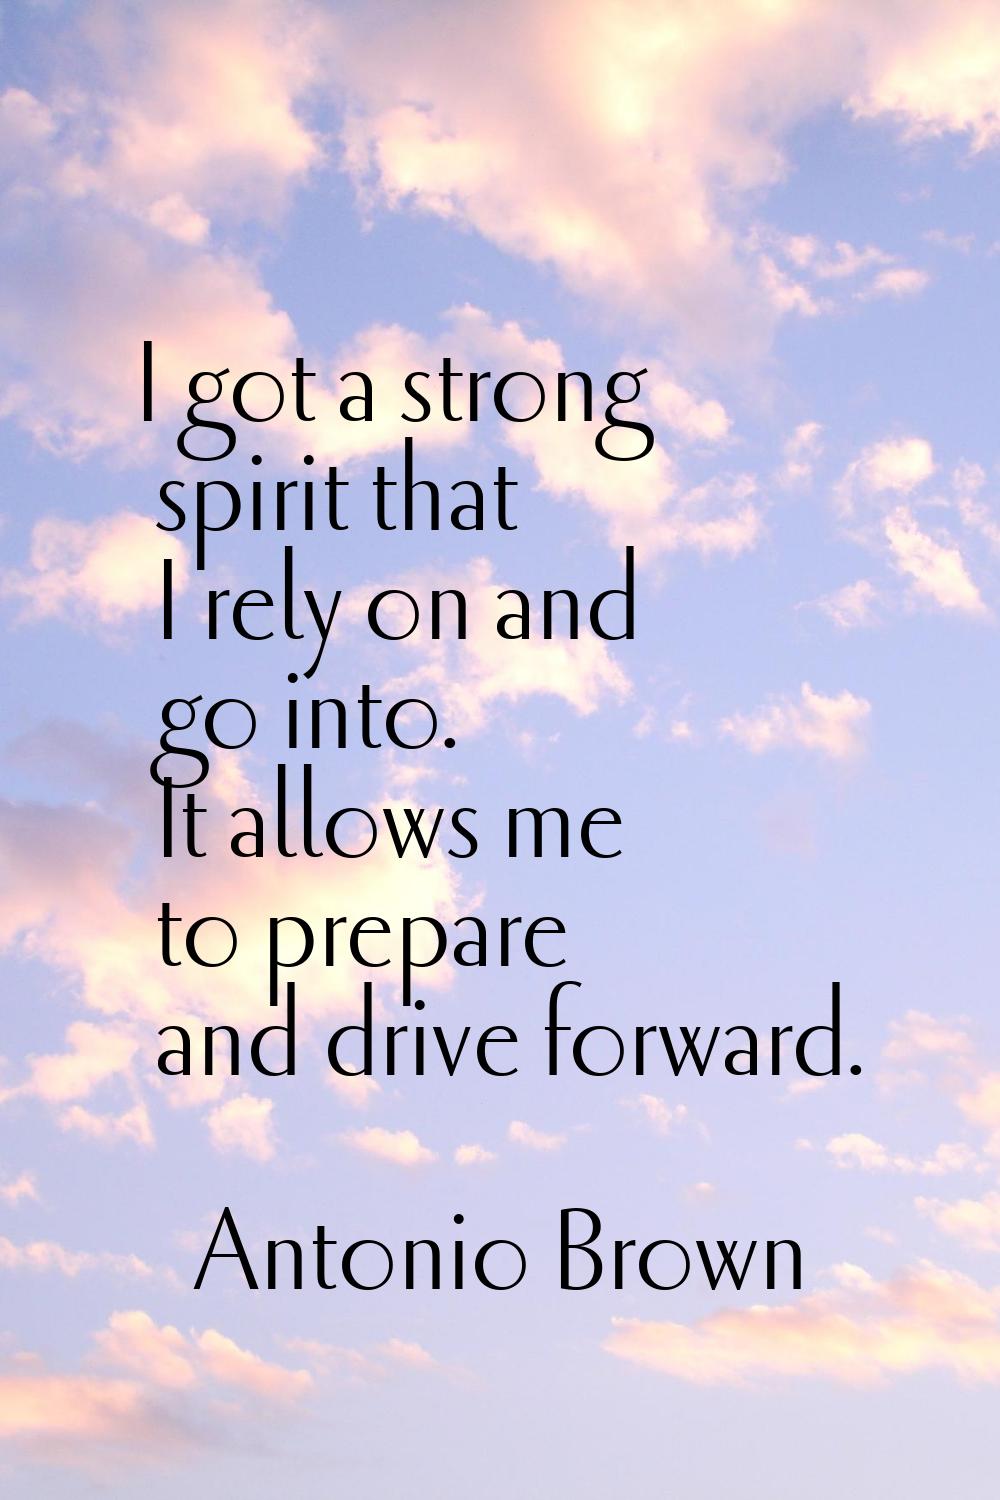 I got a strong spirit that I rely on and go into. It allows me to prepare and drive forward.